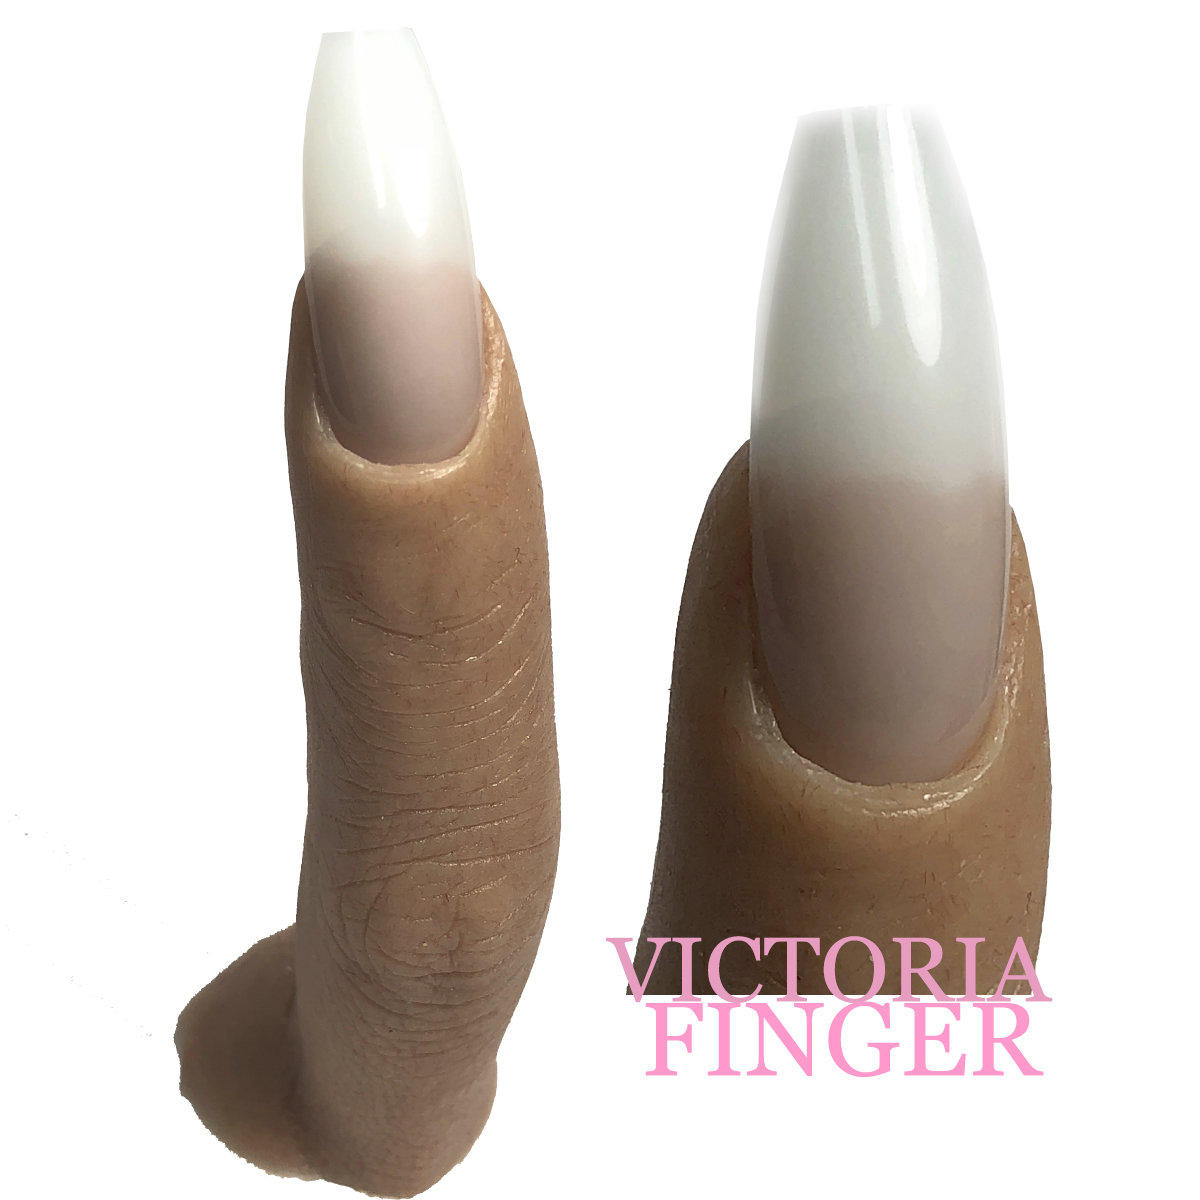 VICTORIA REALISTIC PRACTICE FINGER ( PLEASE READ THE DIRECTIONS & WATCH THE VIDEOS BELOW)